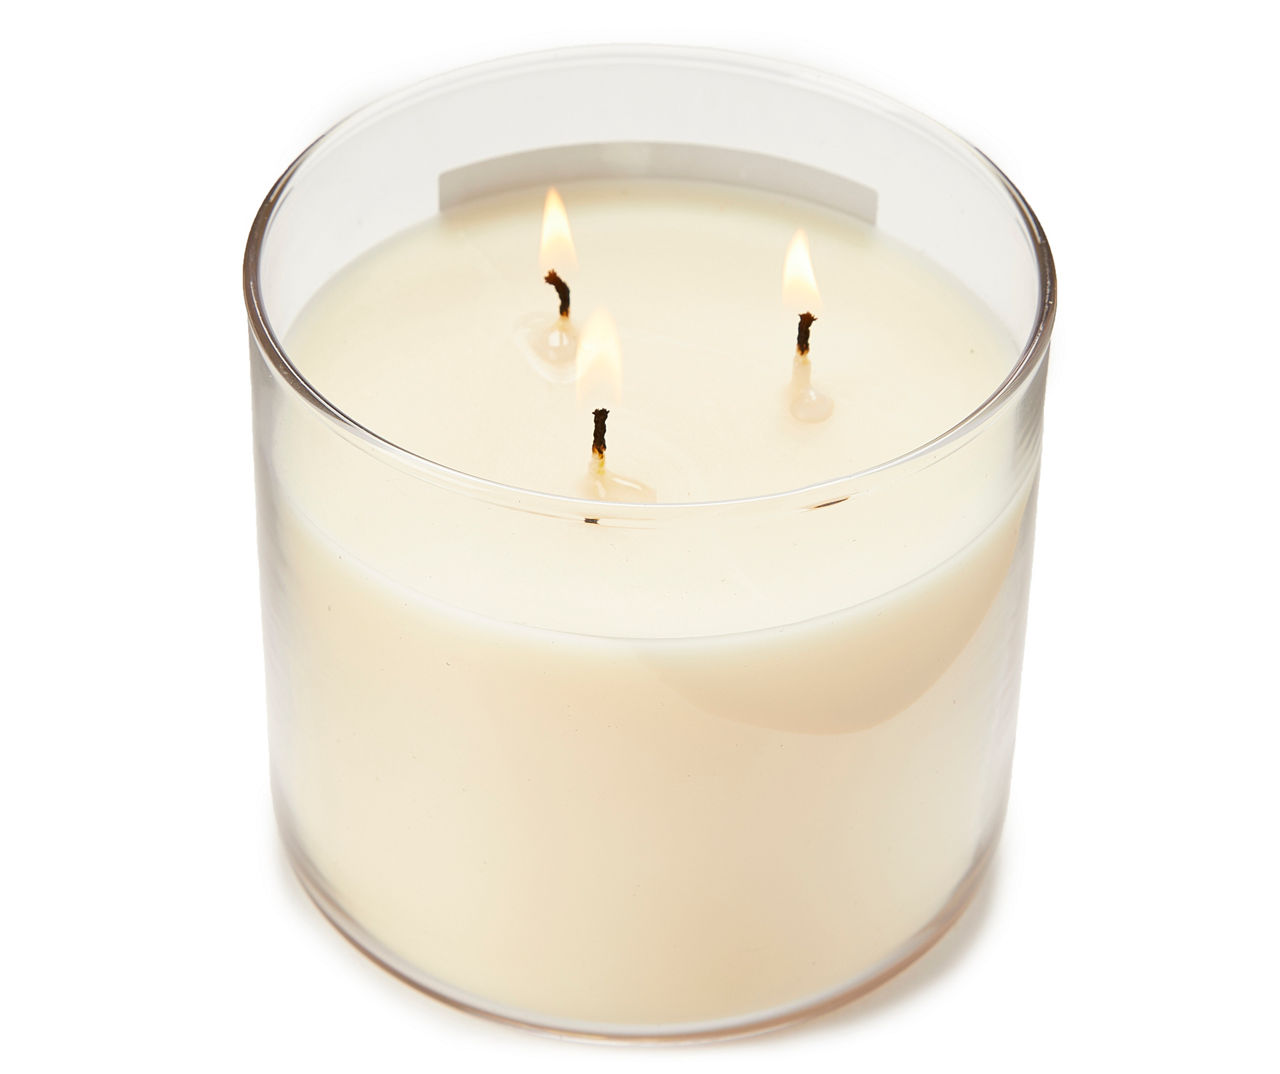 White Honeysuckle 3-Wick Candle, 14 Oz. | Big Lots